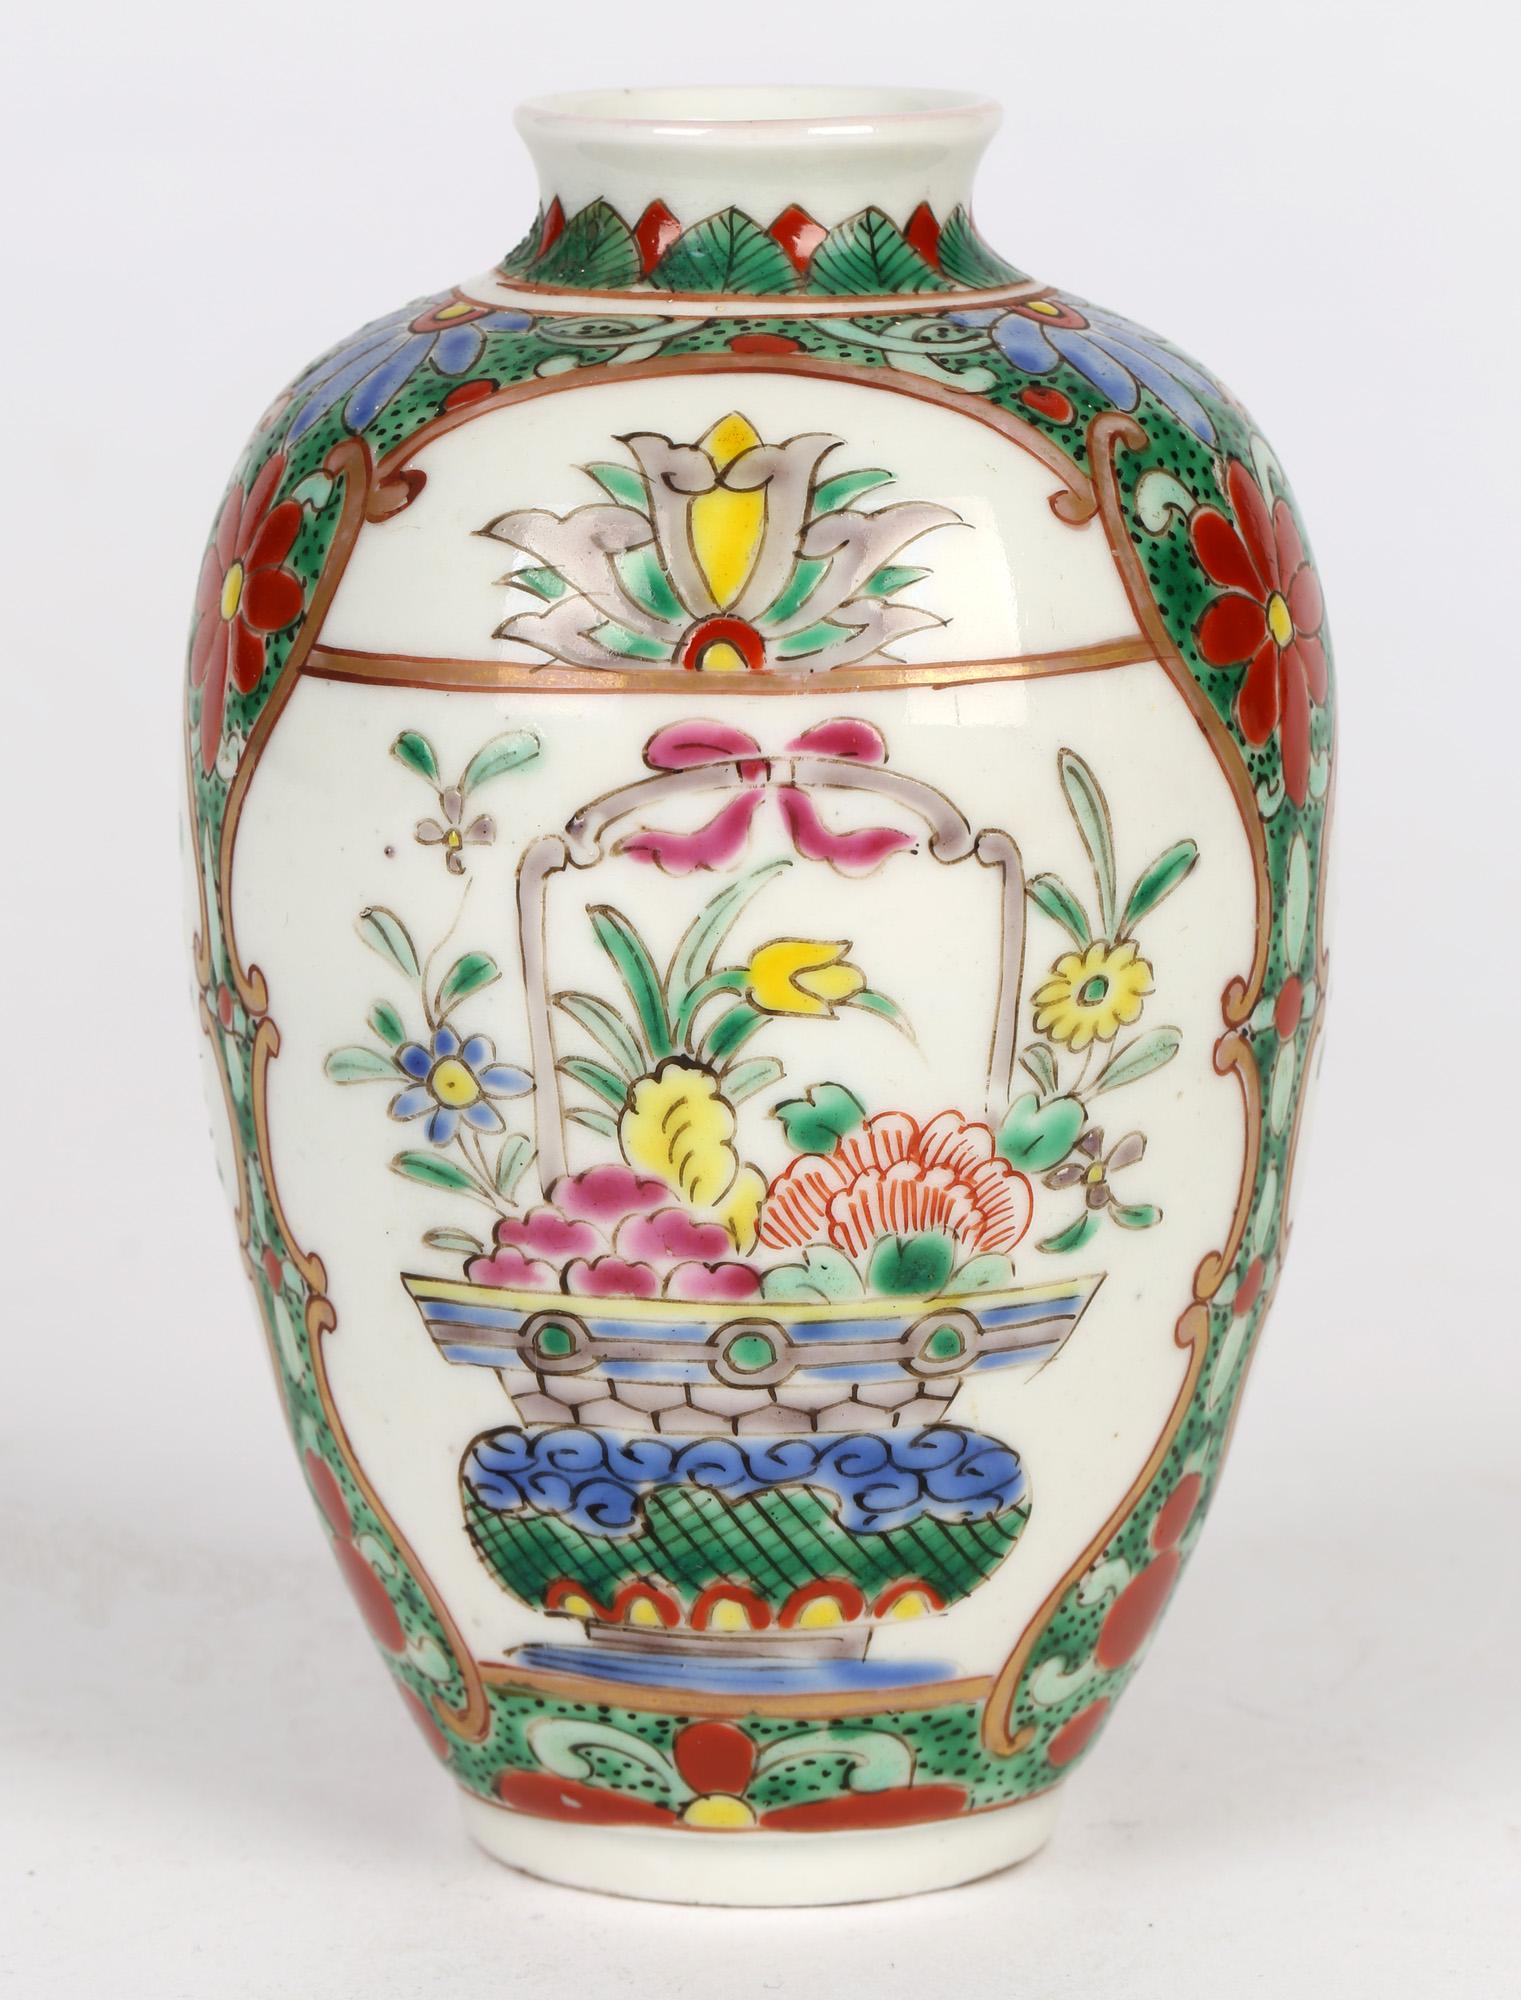 A very finely made oriental styled porcelain vase hand painted with baskets containing flowers dating from the late 19th or early 20th century. The bulbous shaped vase stands on a narrow rounded foot and is hand decorated in coloured enamels with